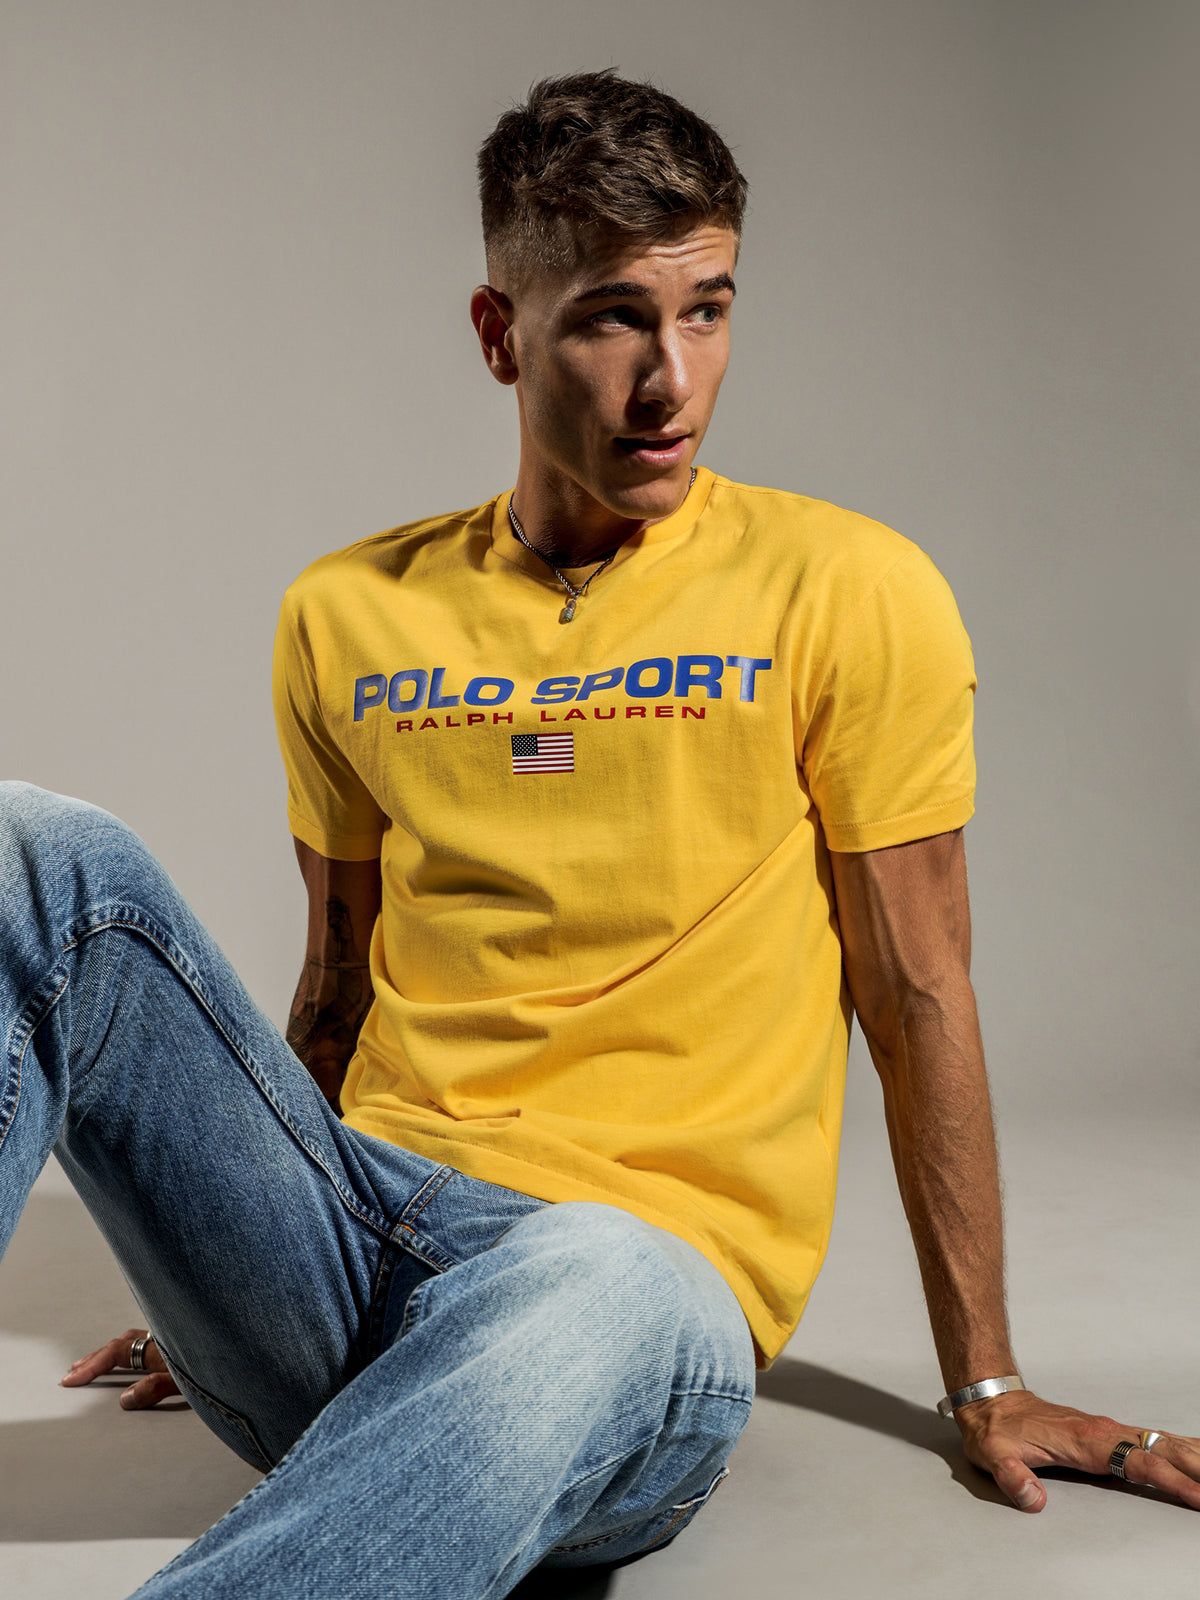 Classic Polo Sport T-Shirt in Yellow